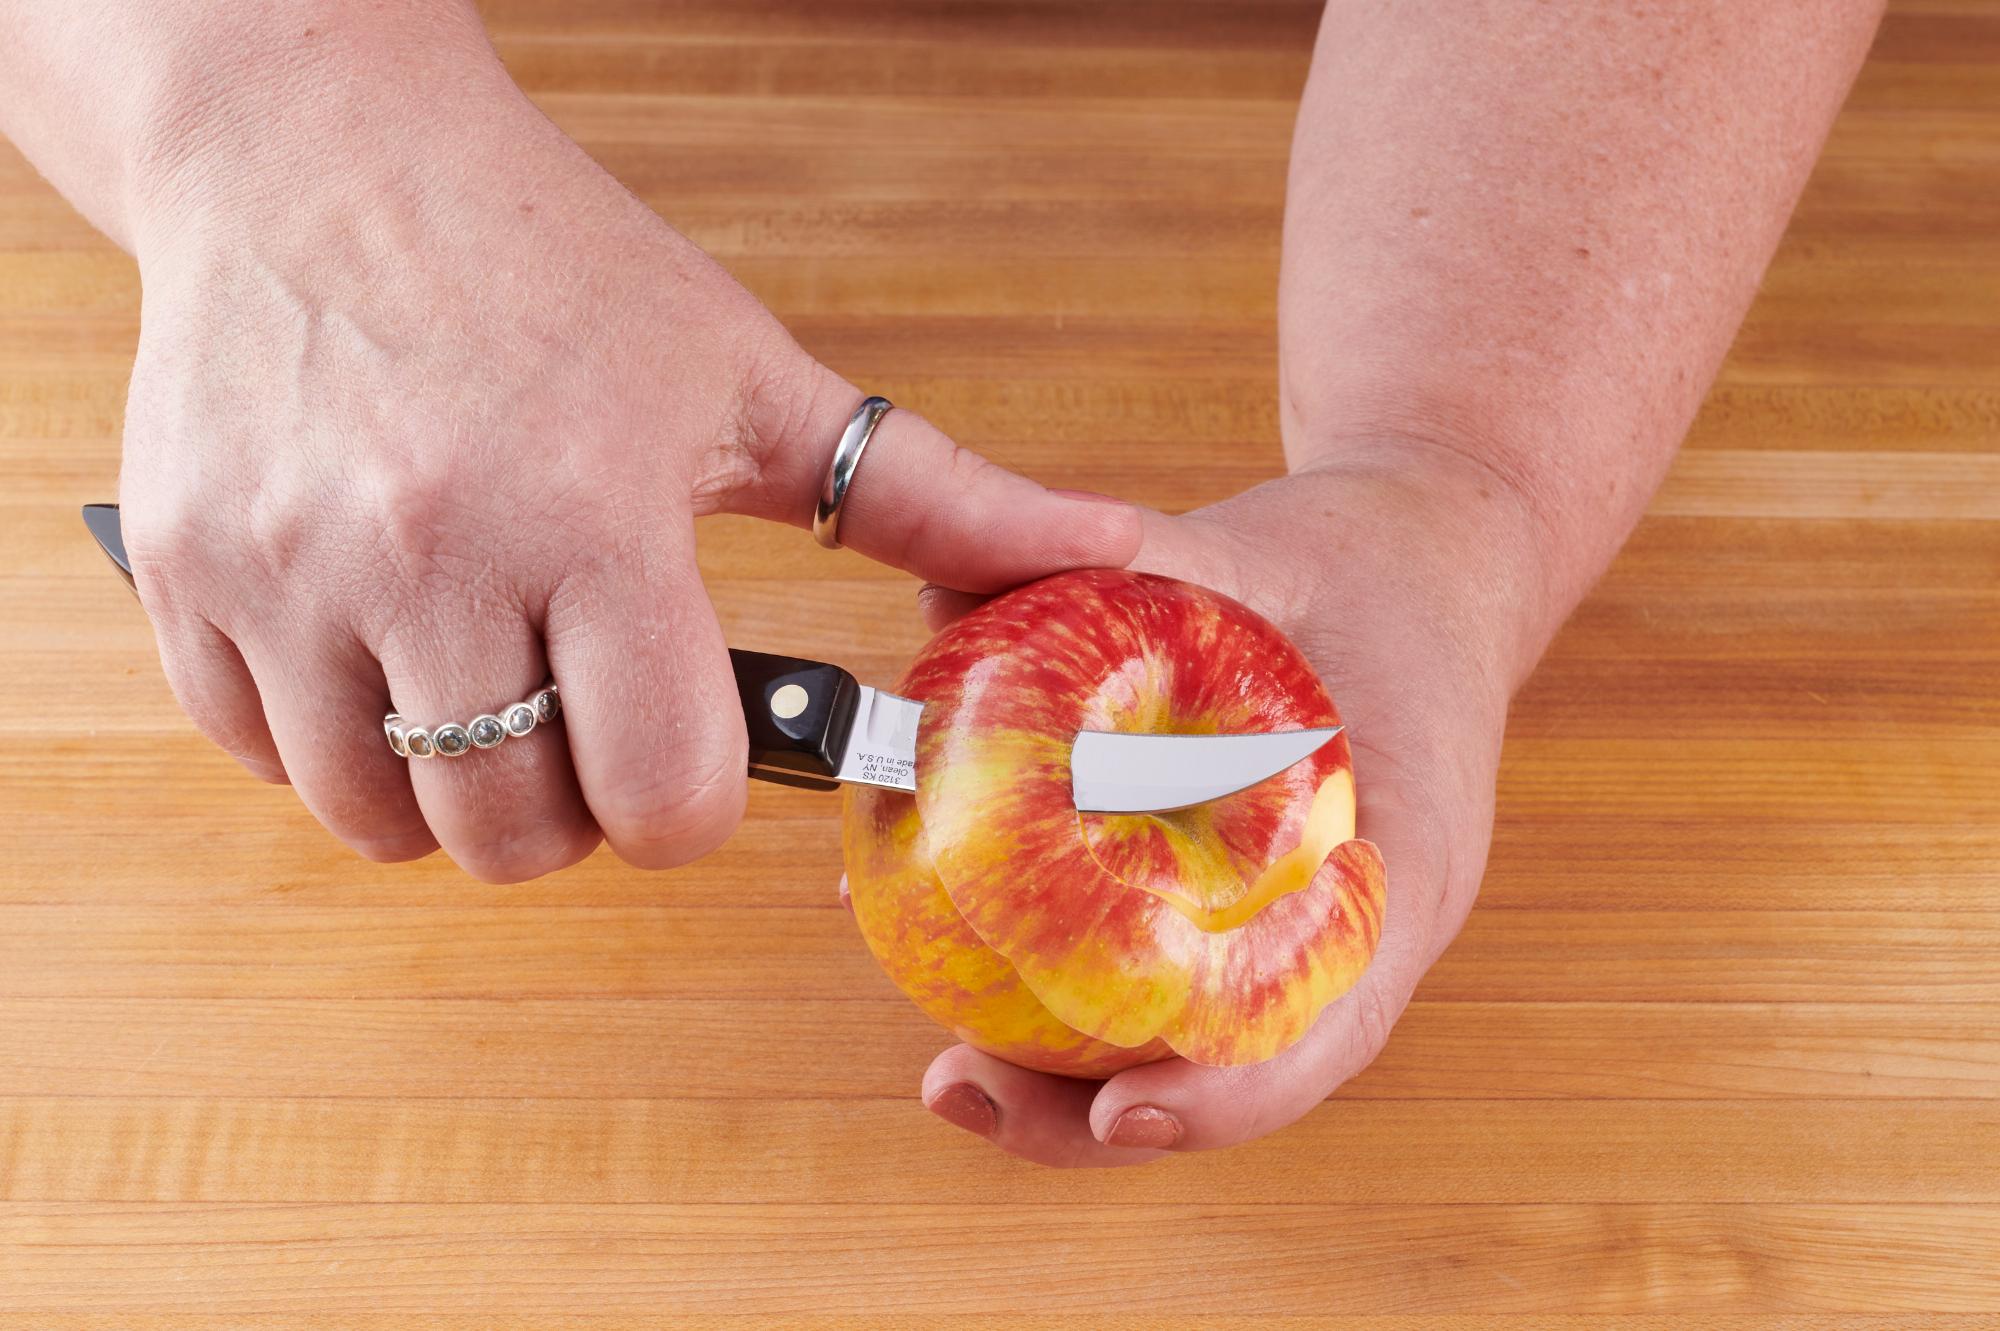 Peel the apples with a Bird's Peak Paring Knife.